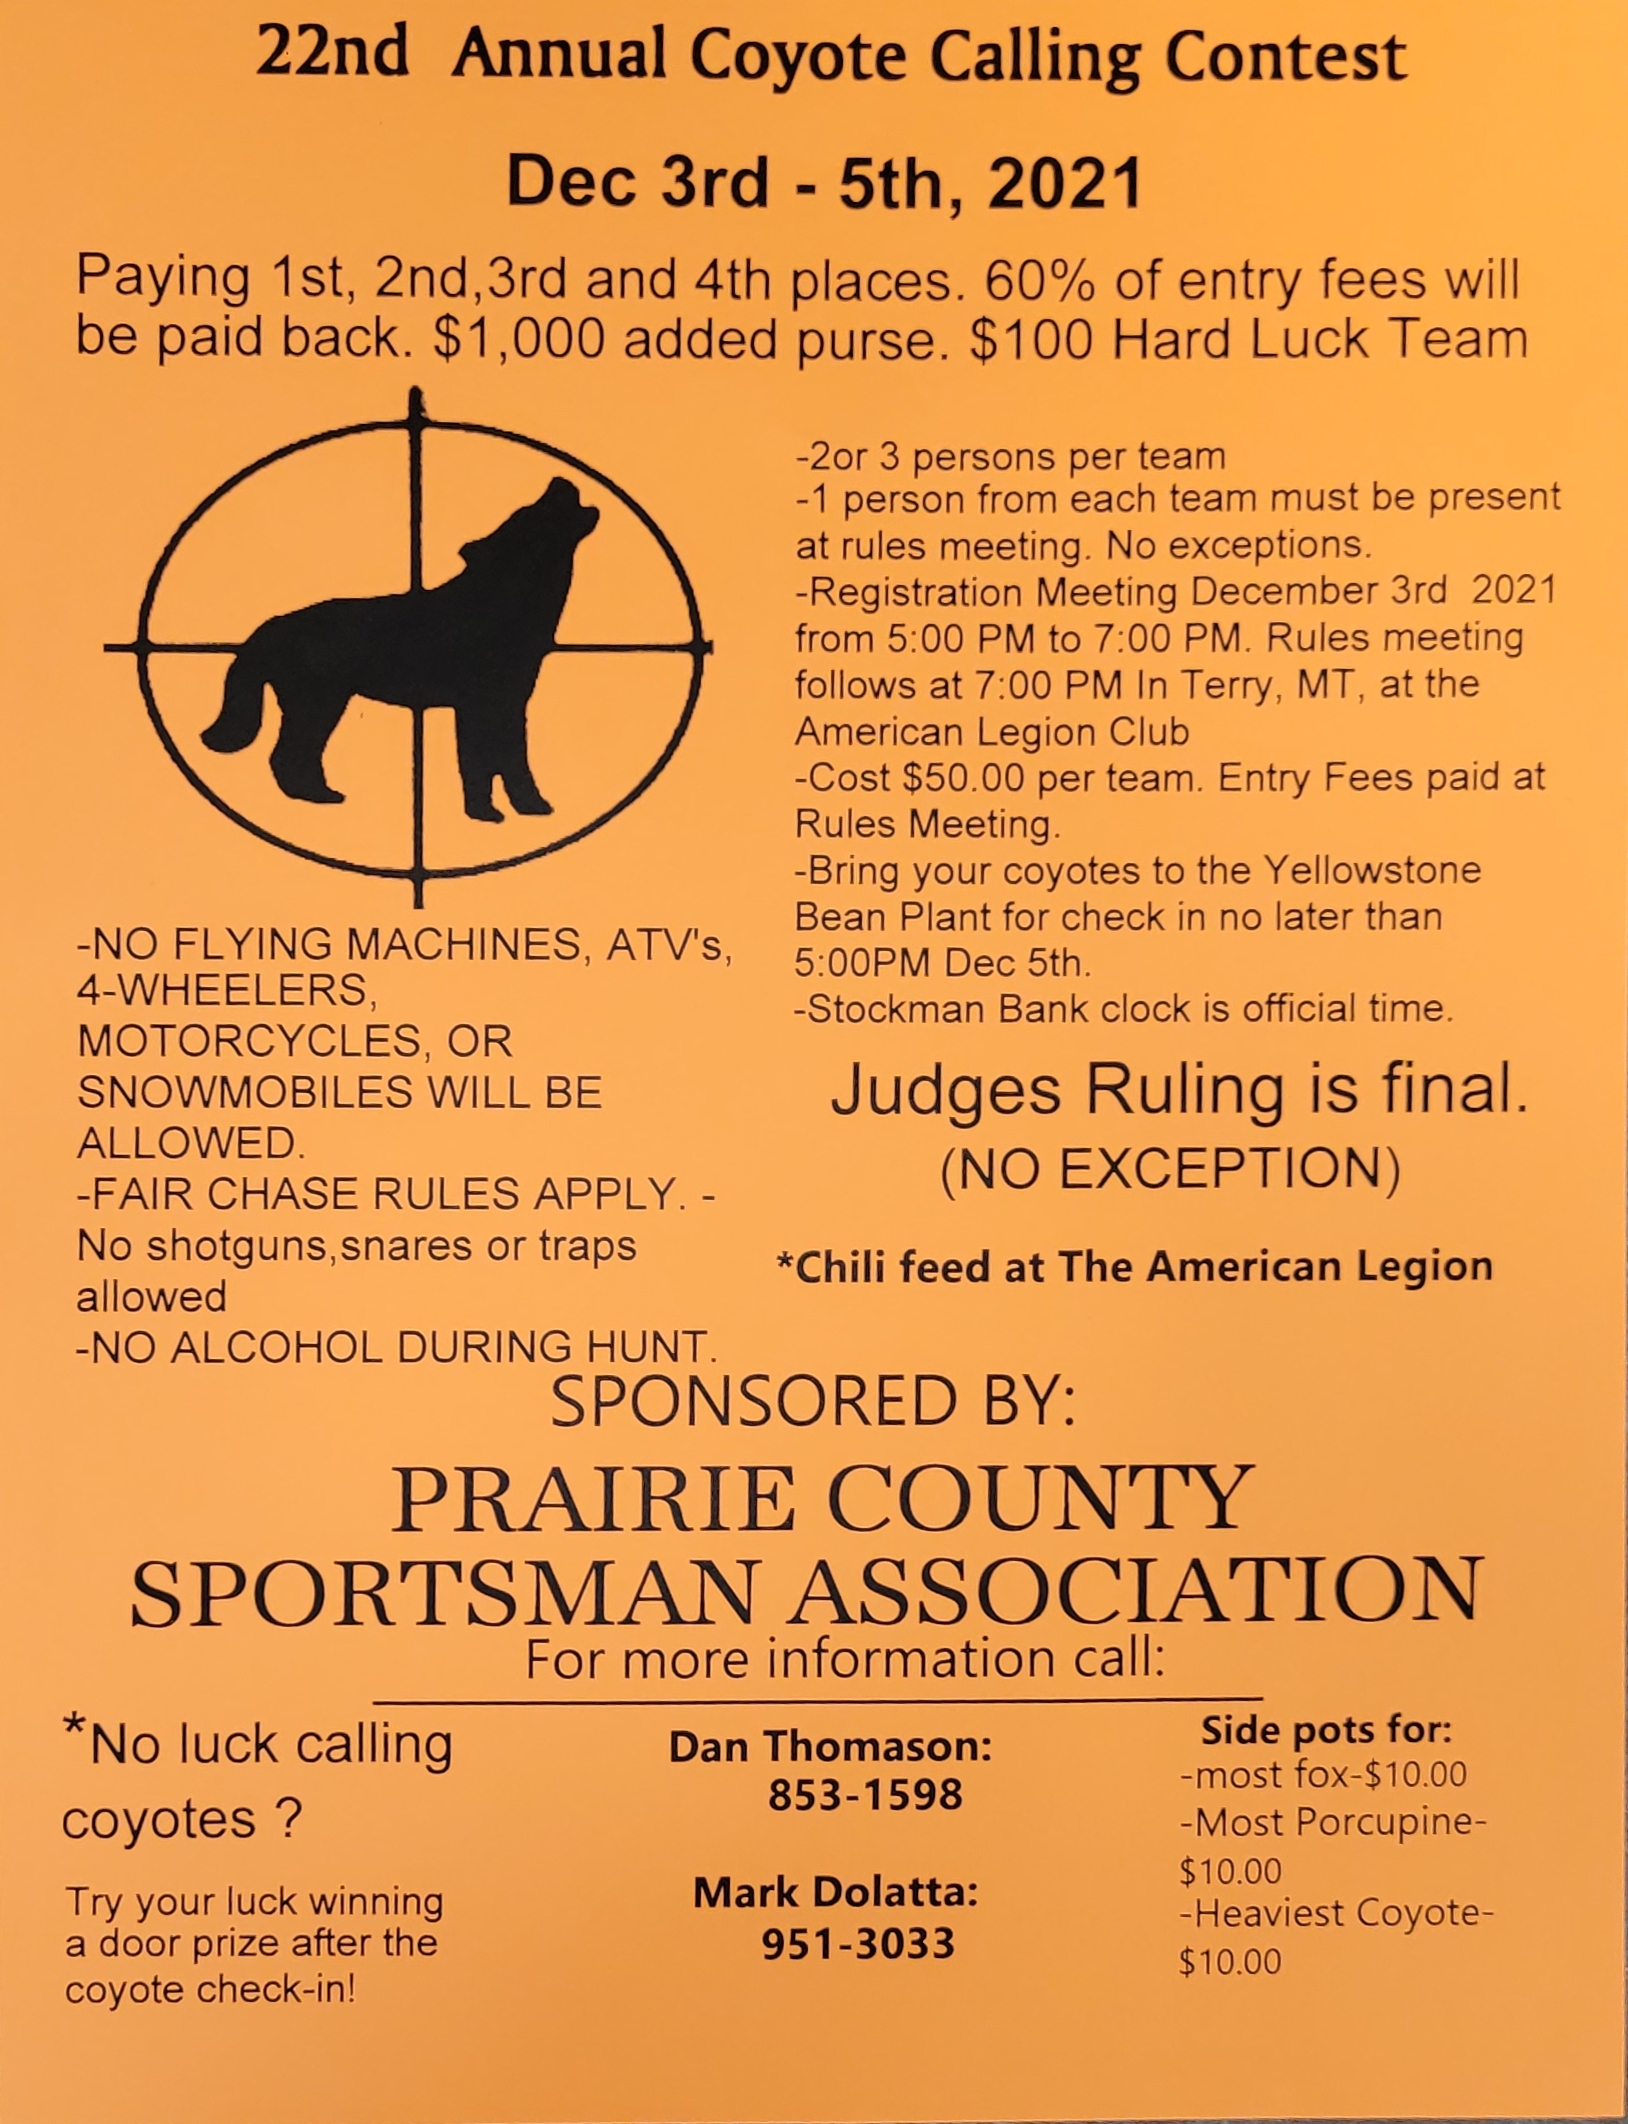 Coyote Calling Contest Flyer 2021